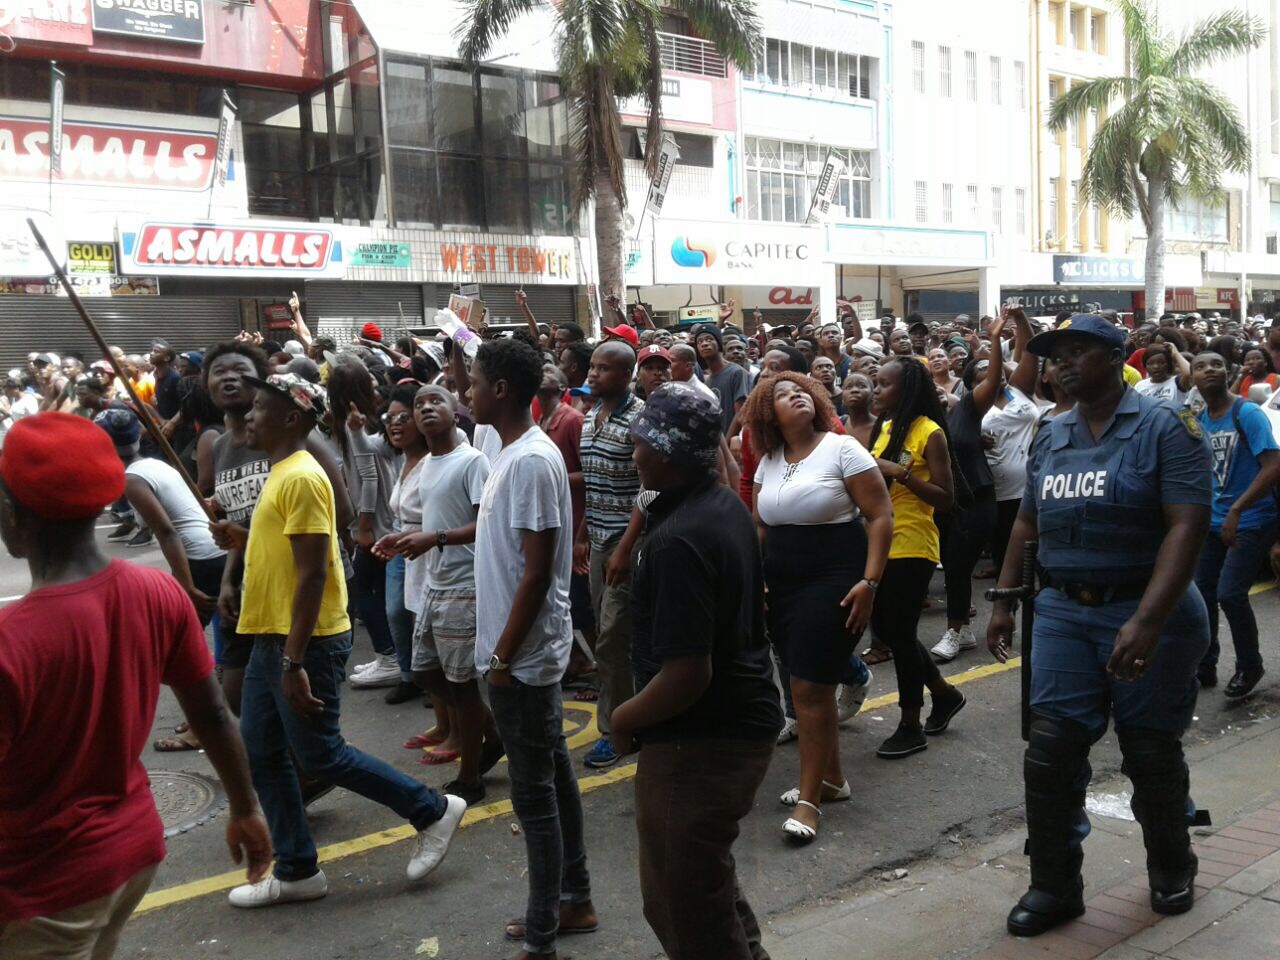 Students marching on West Street. #KZNFMF